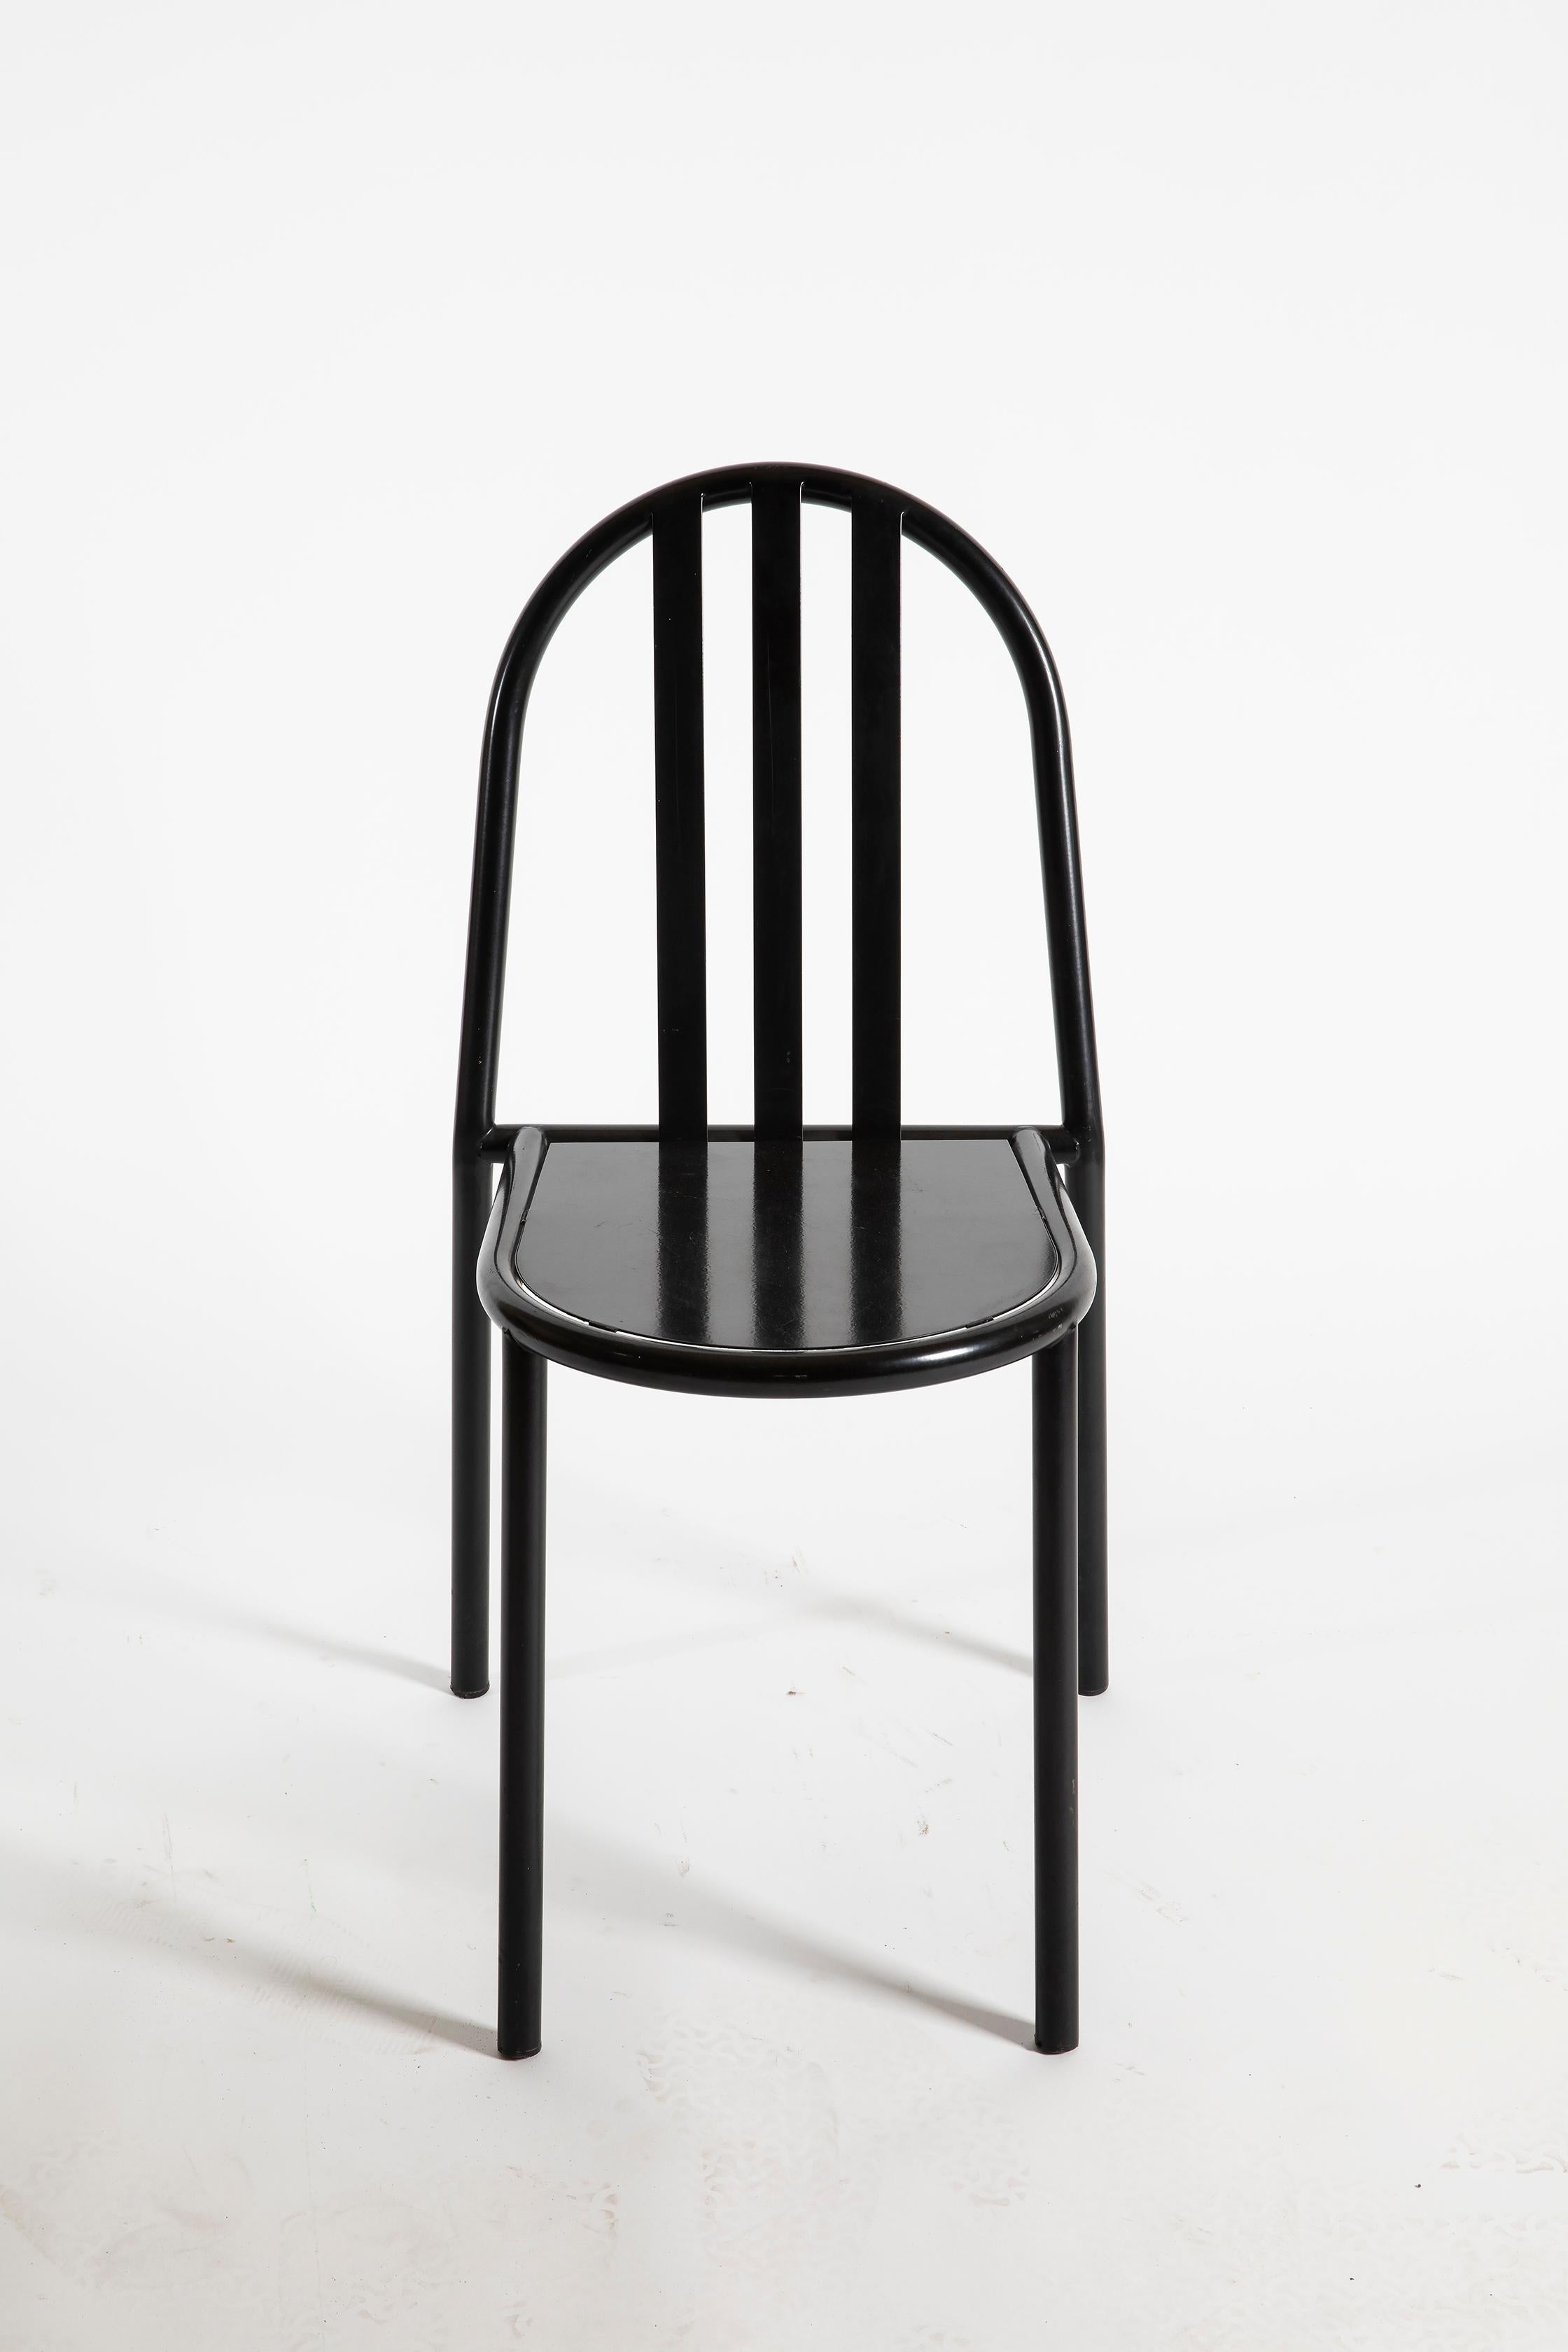 Dining chairs by Robert Mallet-Stevens. Essential design from 1930s with structure in black lacquered steel tube. Stackable. This set is a re-edition from the famous Italian factory Pallucco in 1980s.
Twelve chairs available.

Bibliography
Pallucco